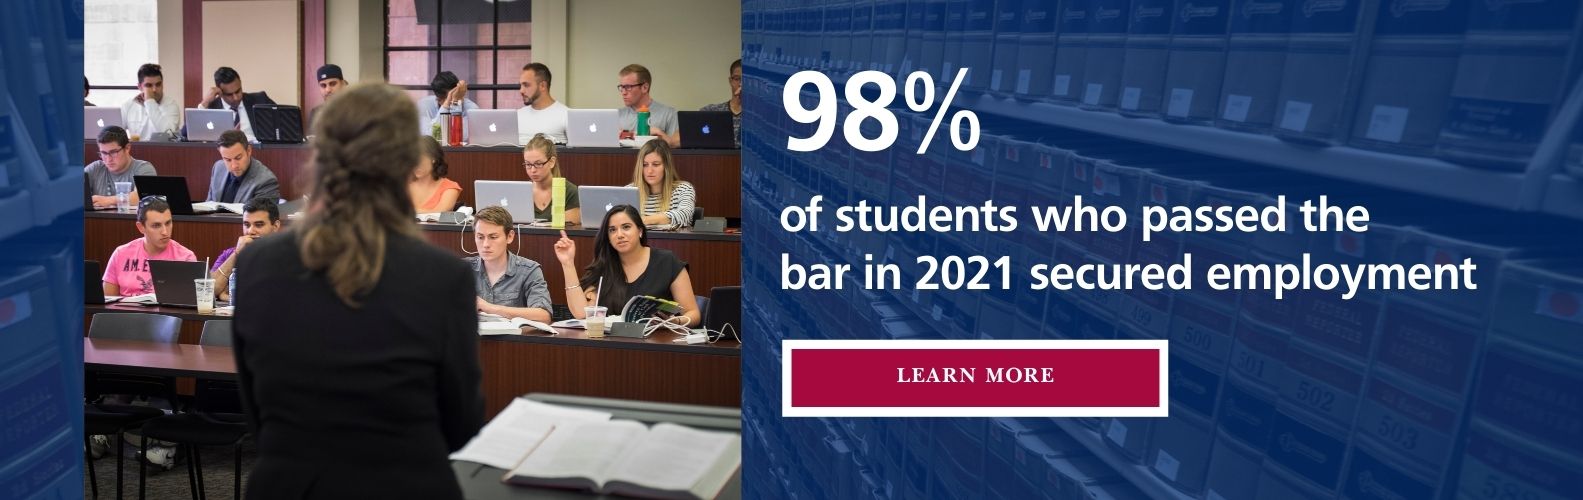 98% of students who pass the bar in 2021 secured employment